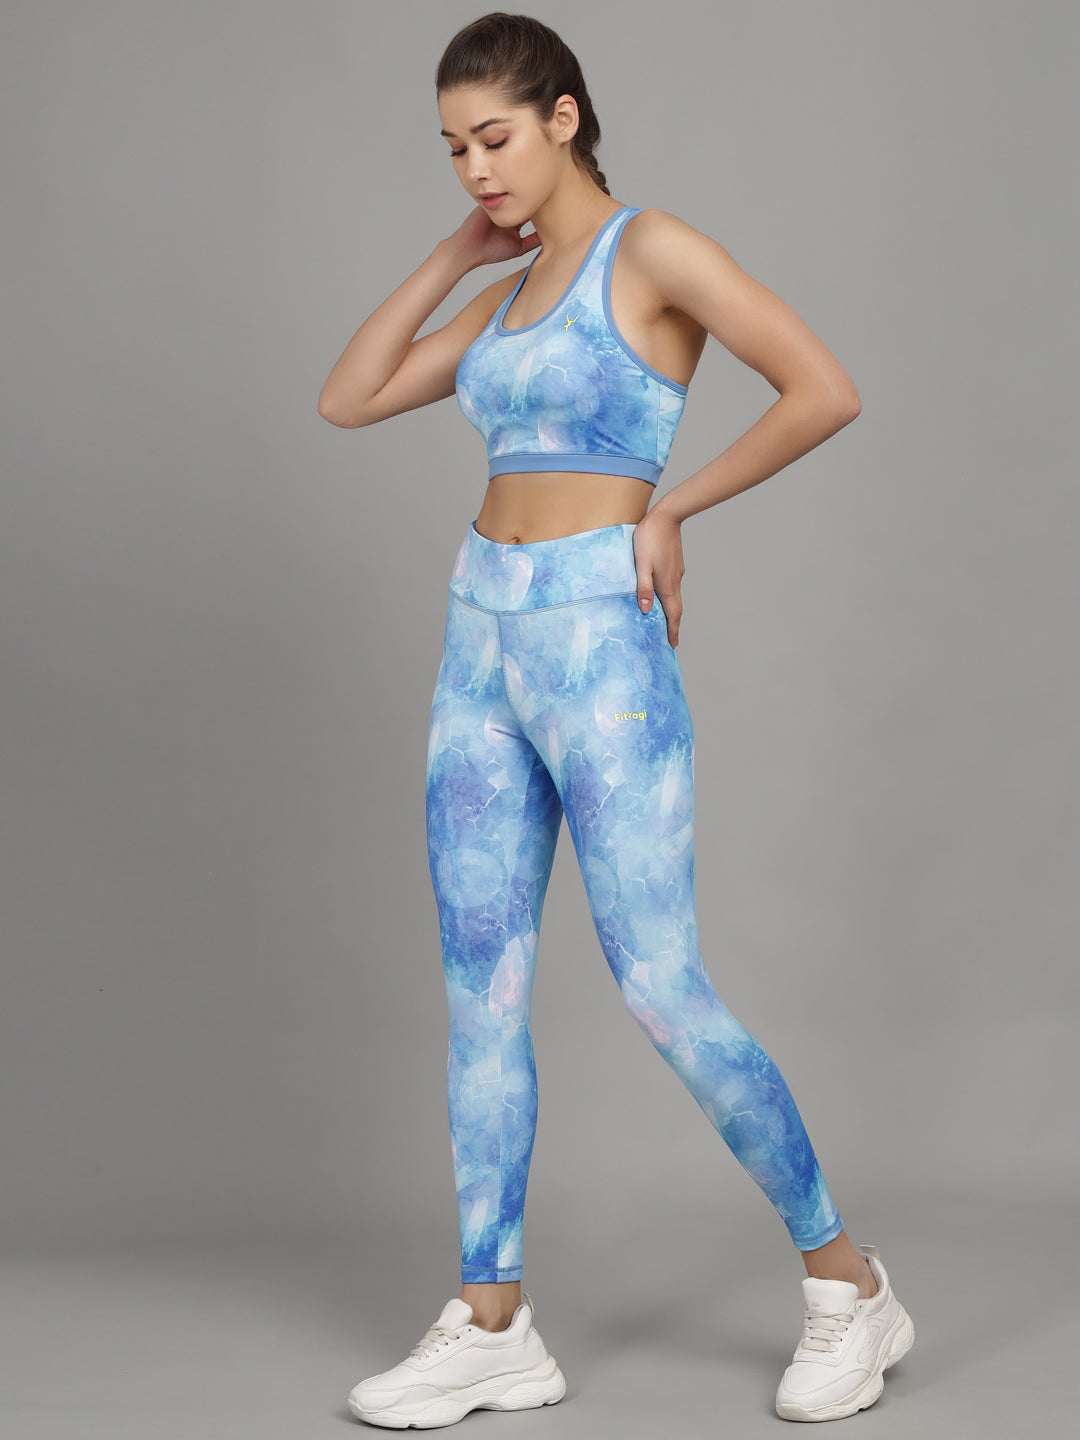 Bright Turquoise Print Stretchable Yoga Sets Tracksuit/Gym Sports Set Of Sports Bra And Legging